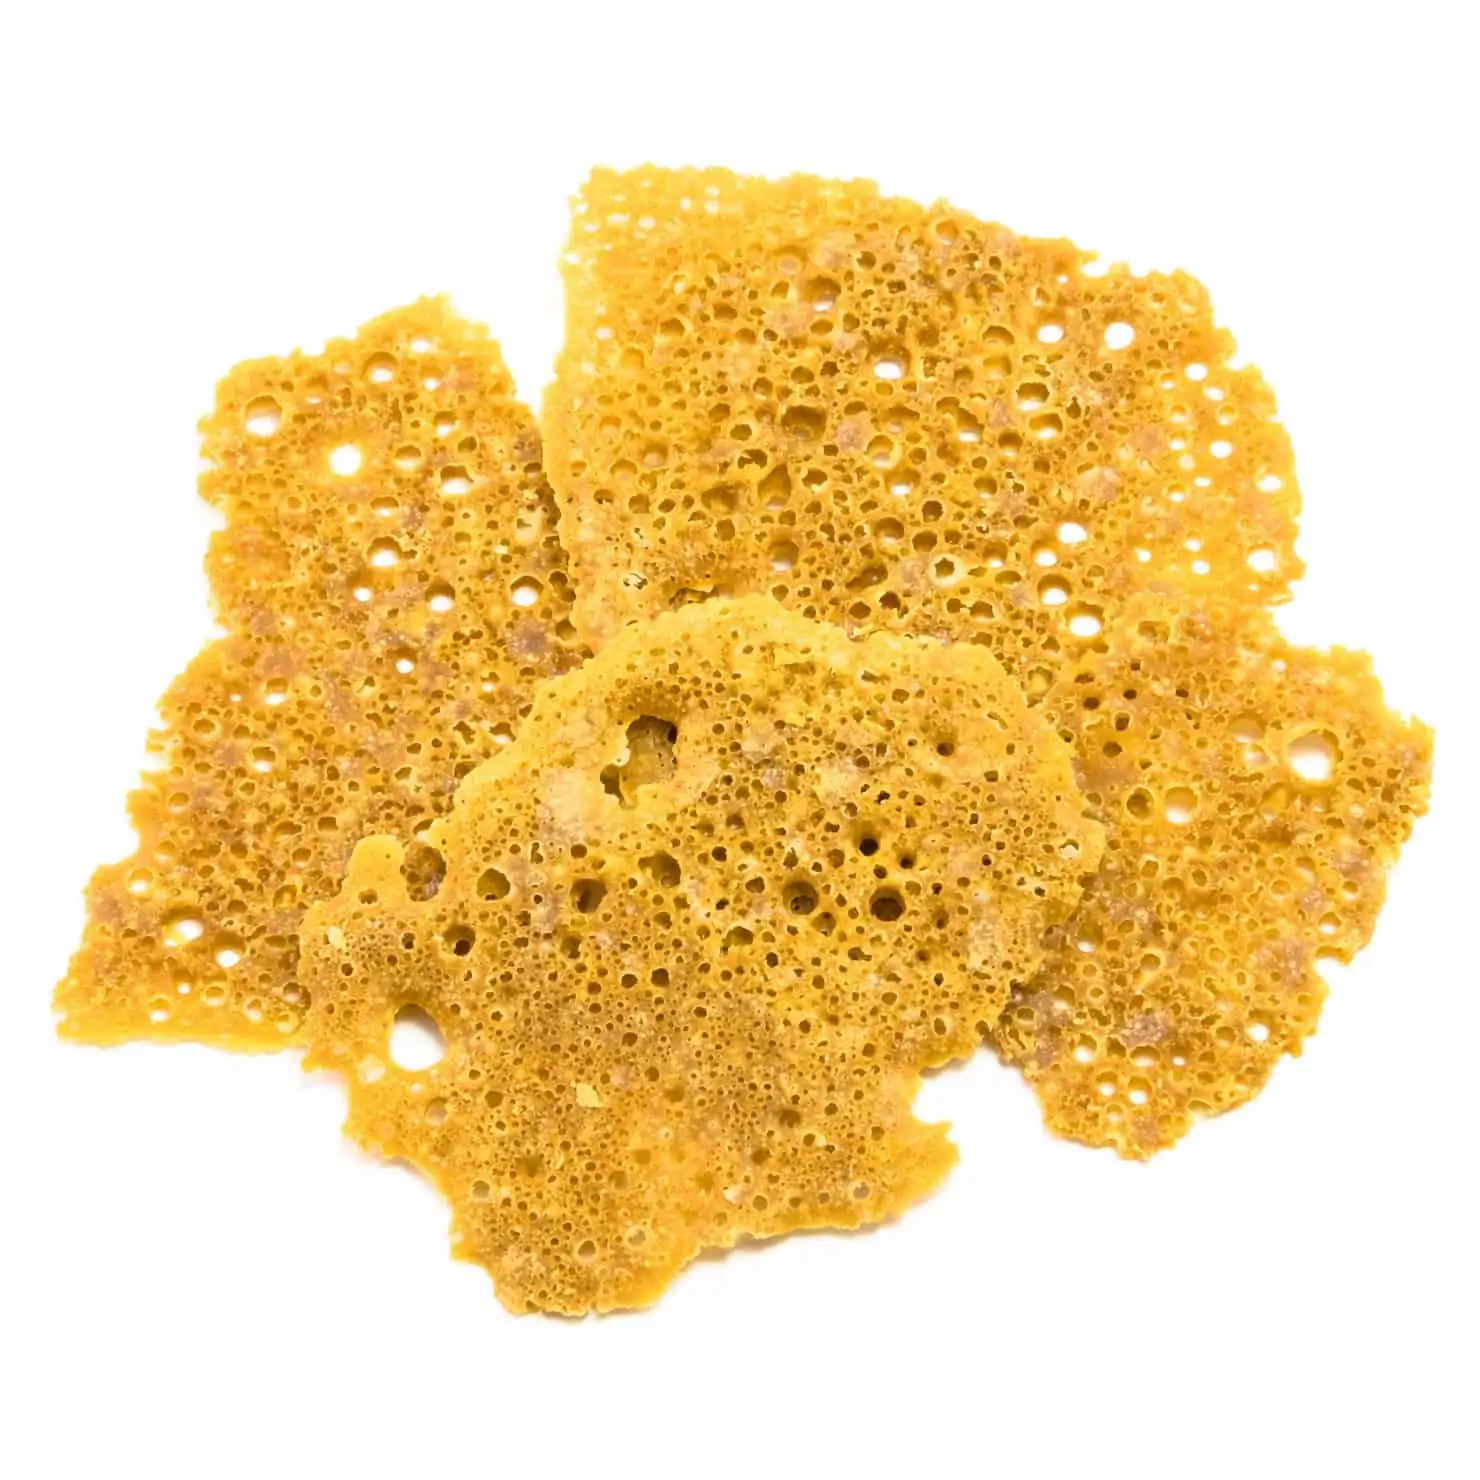 What is Crumble Wax?